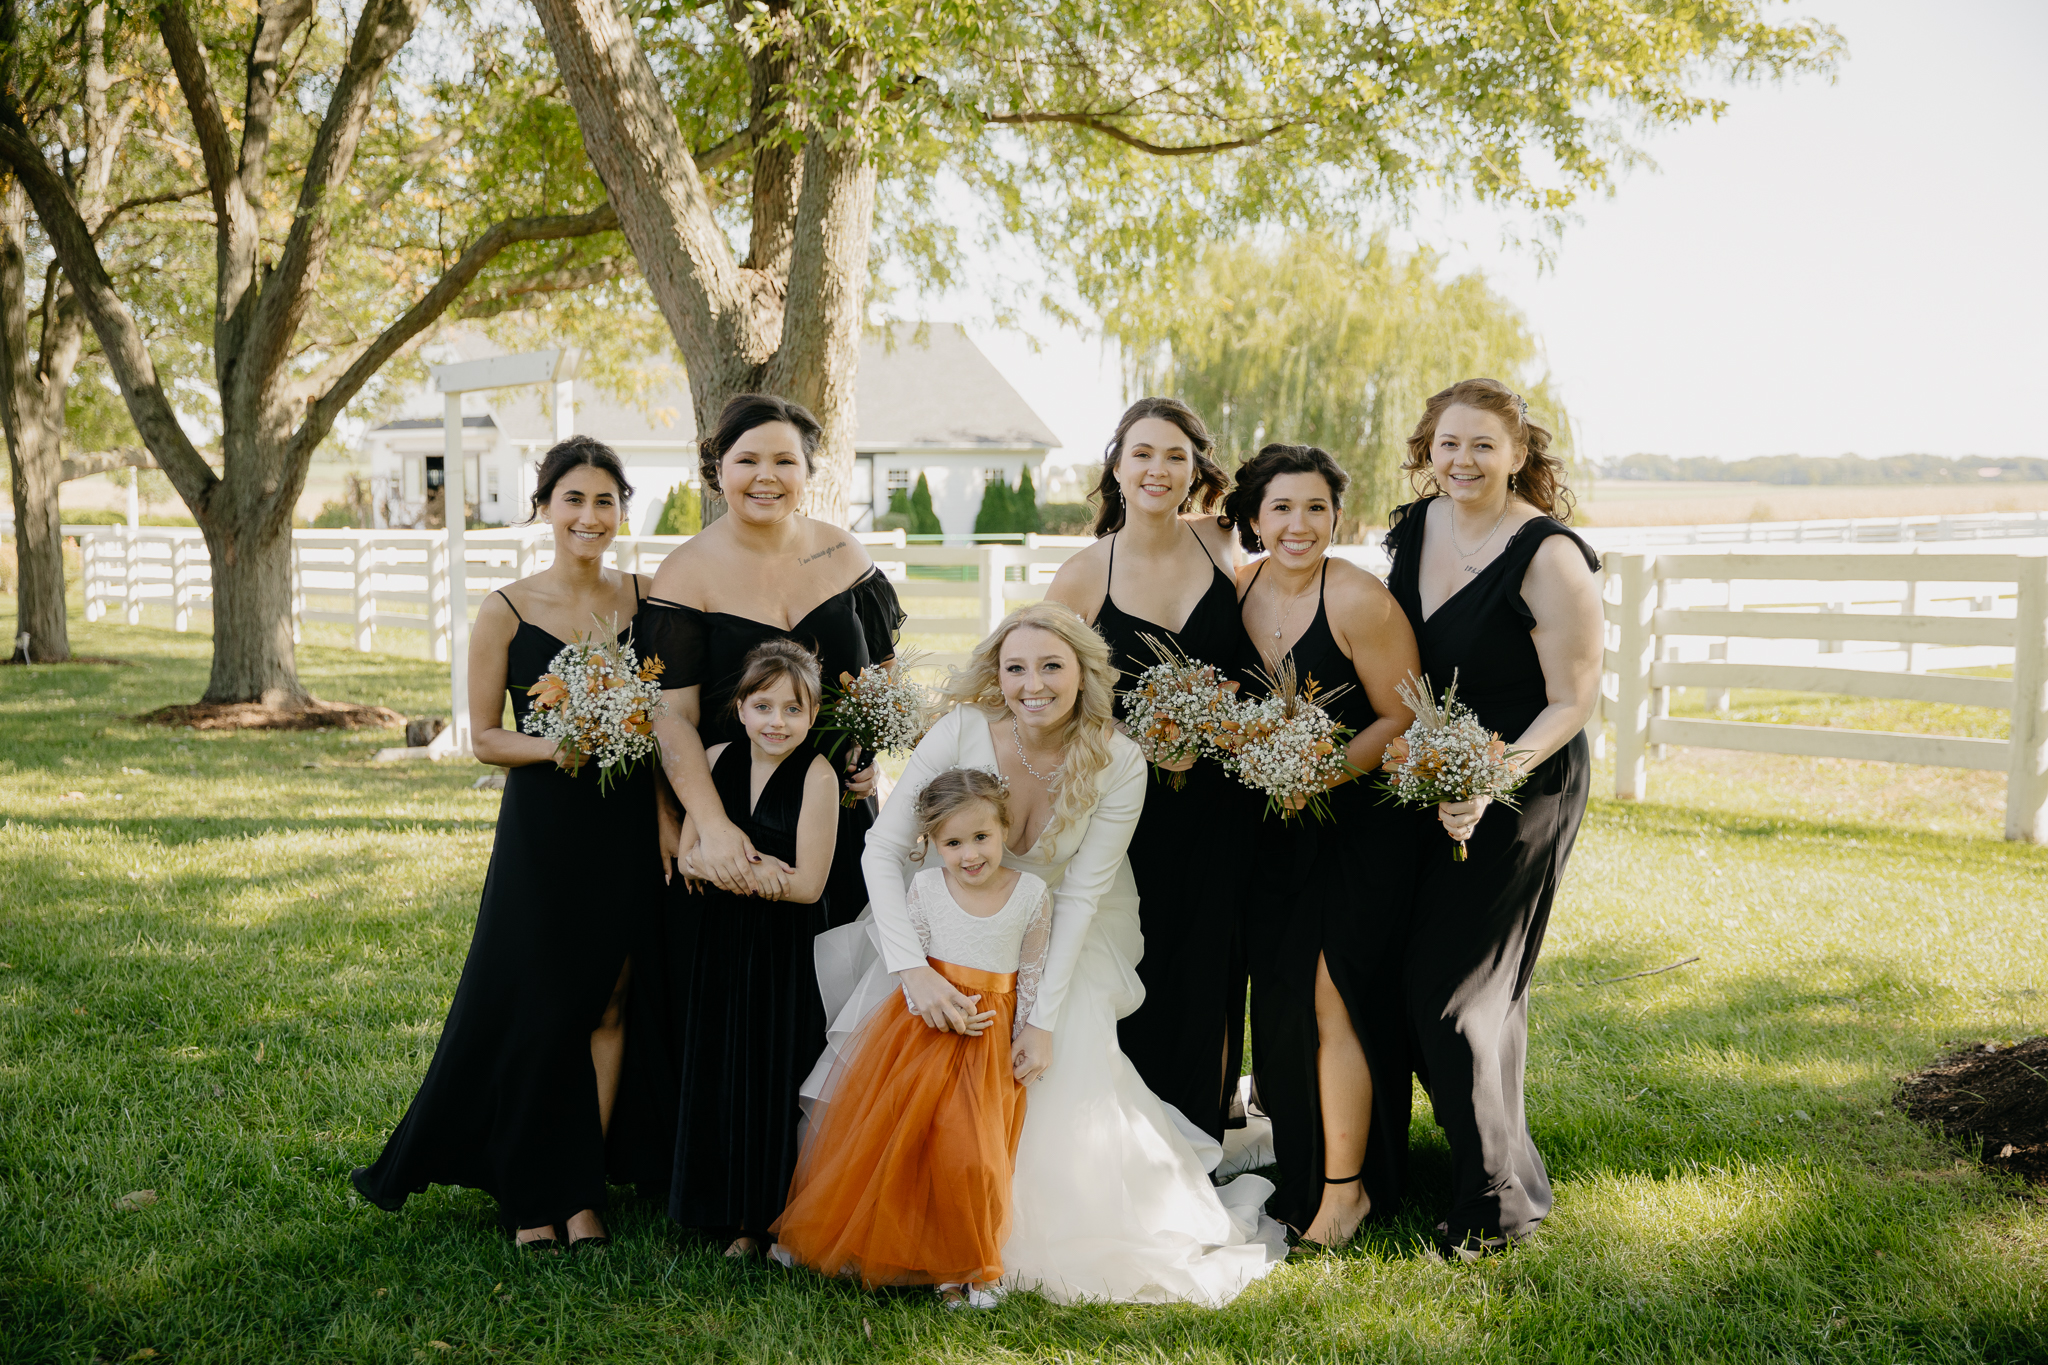 Bridesmaids and bride smile and laugh together with bouquets, standing in front of horse pastures at Northfork Farm